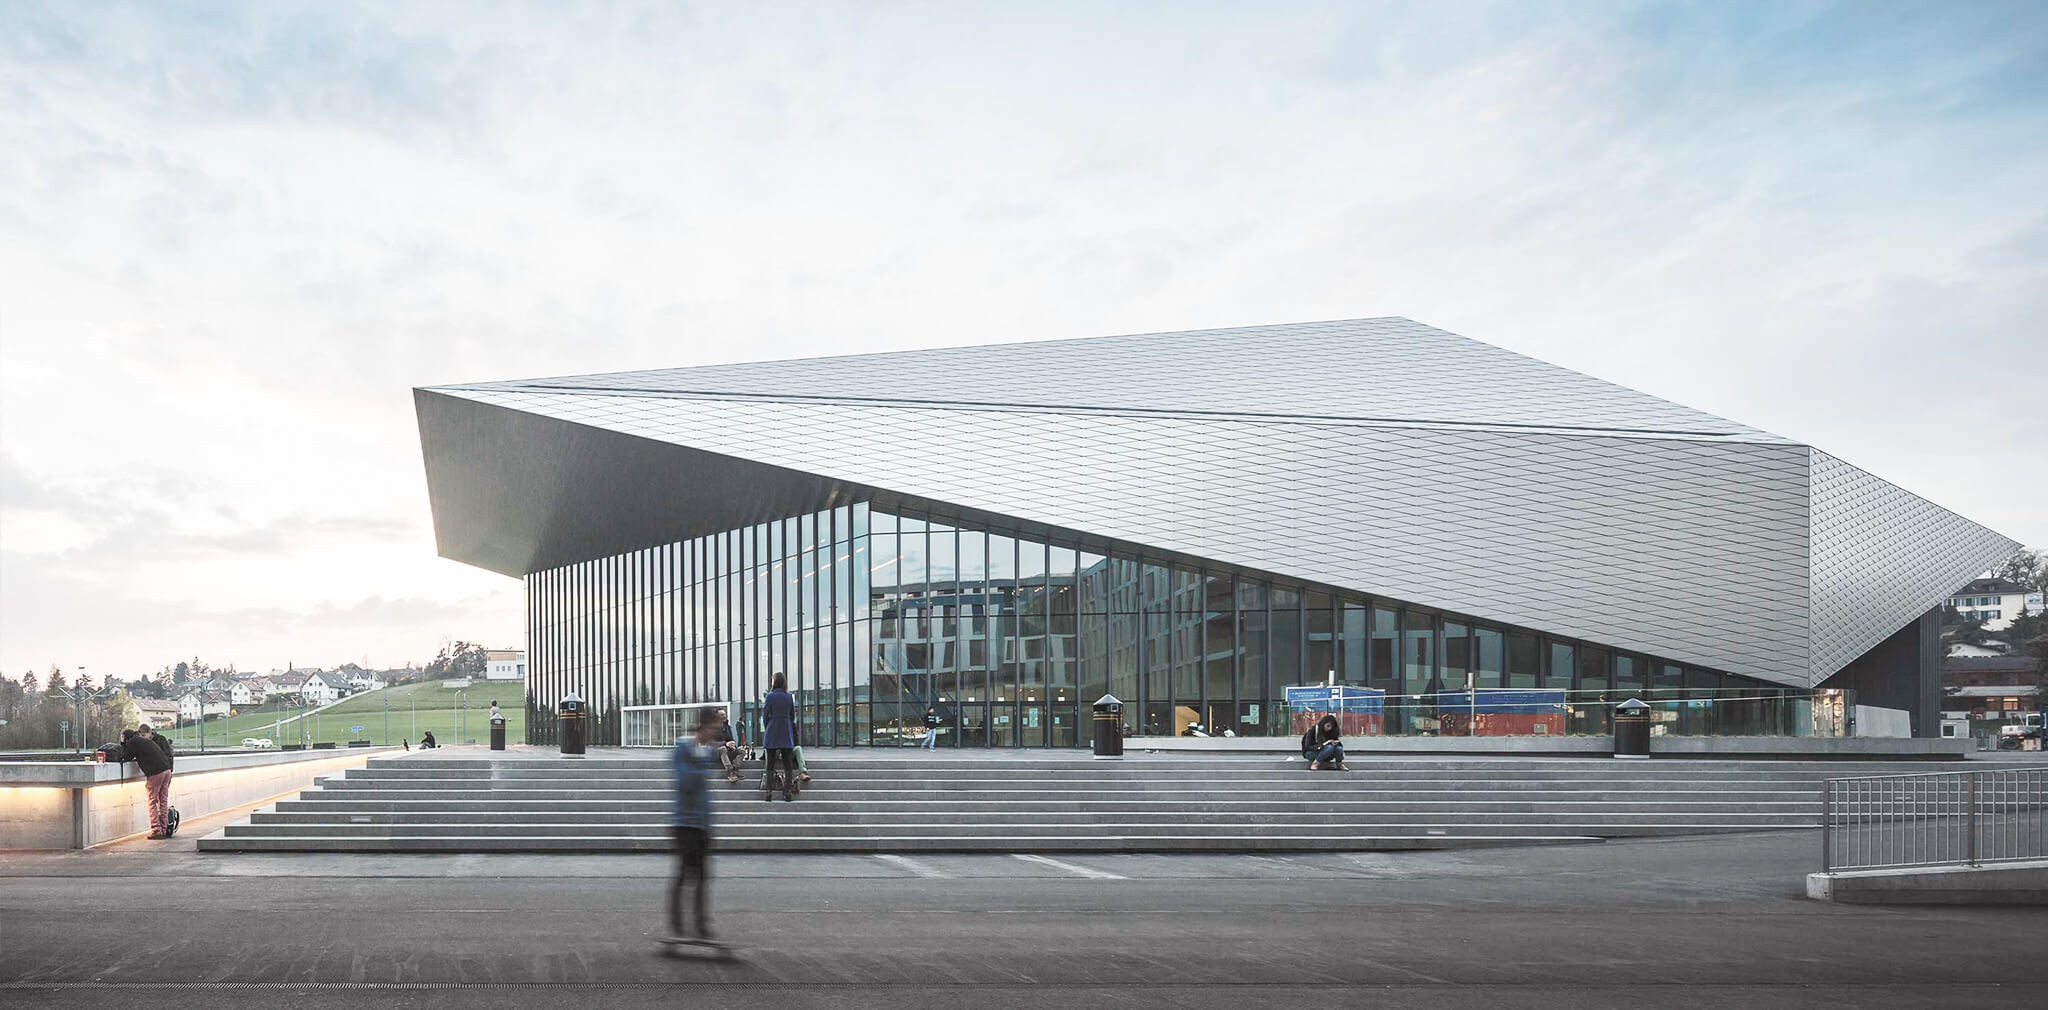 The symposium was due to take place at the SwissTech Convention Center in Lausanne ©SwissTech